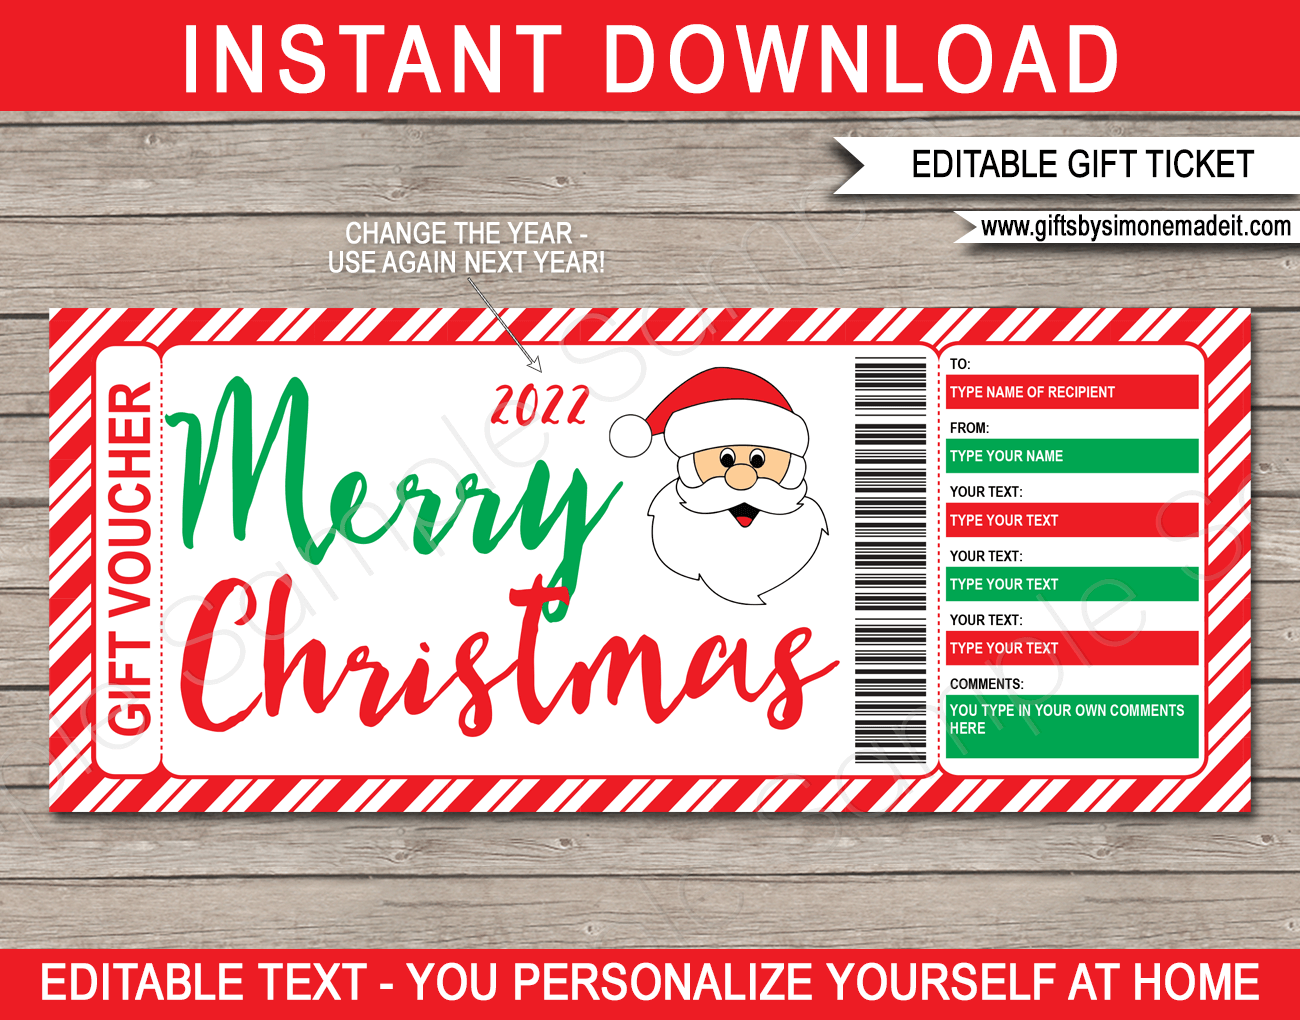 Christmas Santa Gift Voucher Template | Editable & Printable Gift Certificate | Personalized Custom Santa Claus Gift Card | Instant Download via giftsbysimonemadeit.com